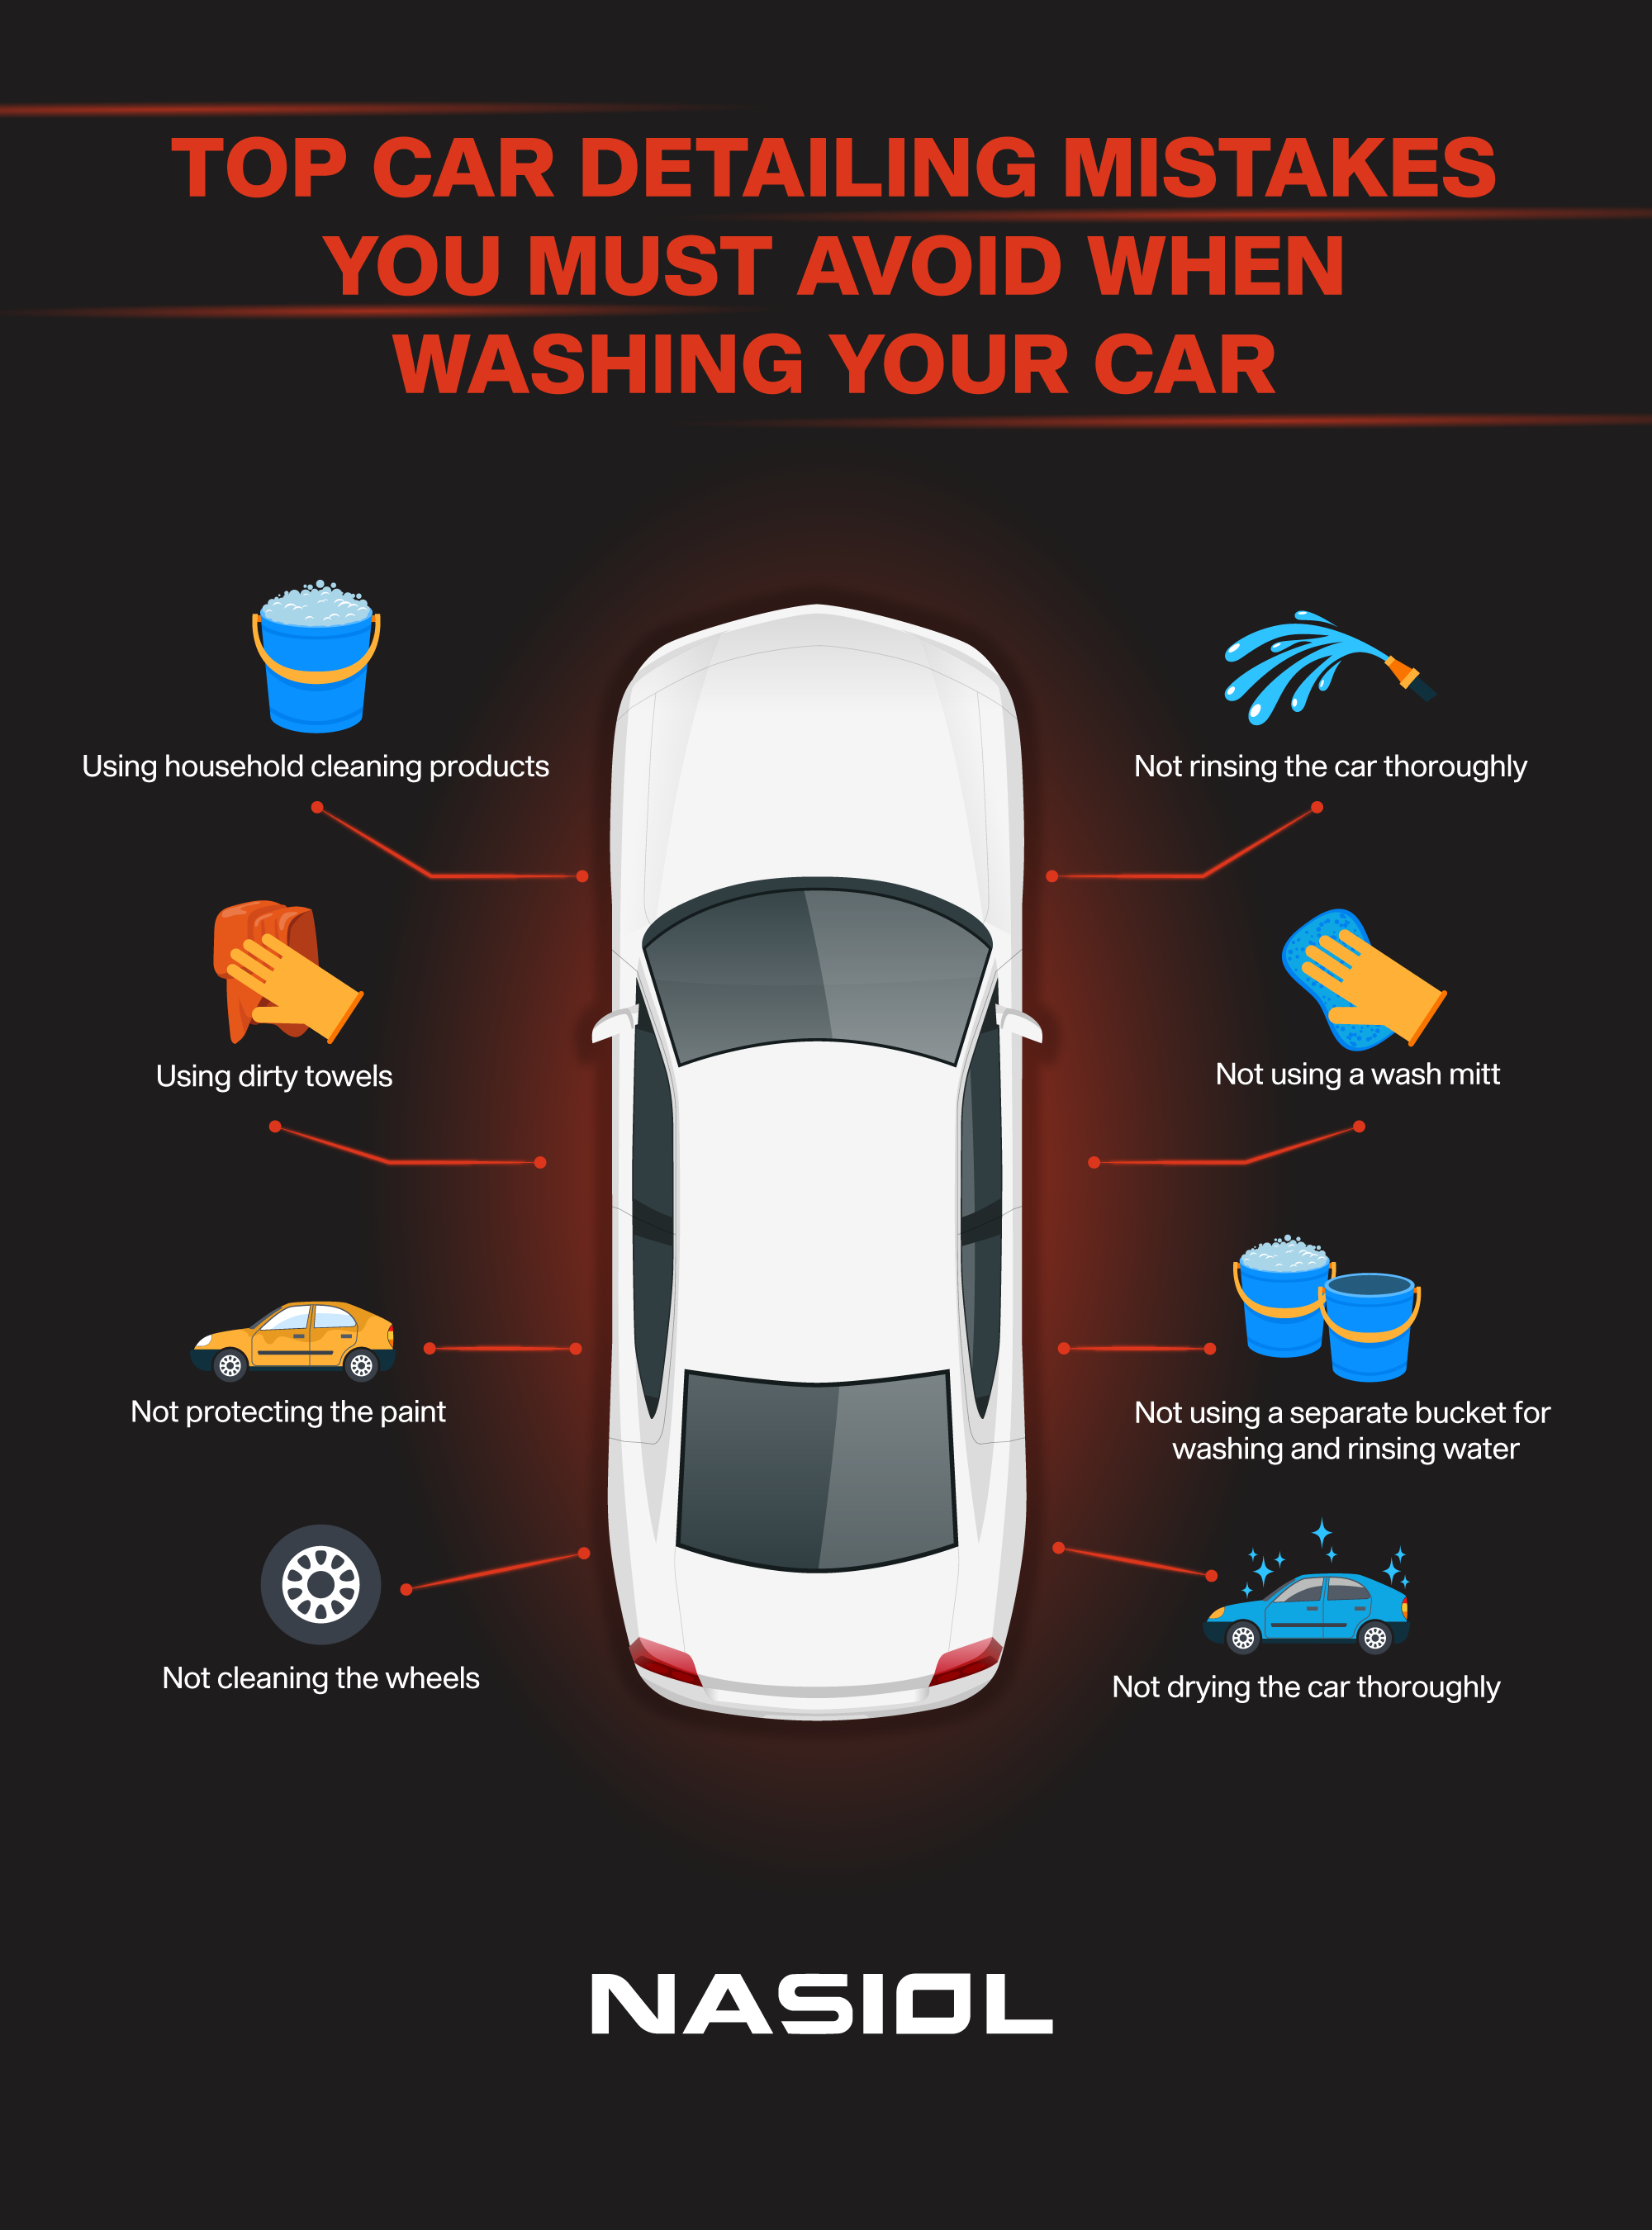 How To Pressure Wash Your Car - The Detailing Nerd's Guide